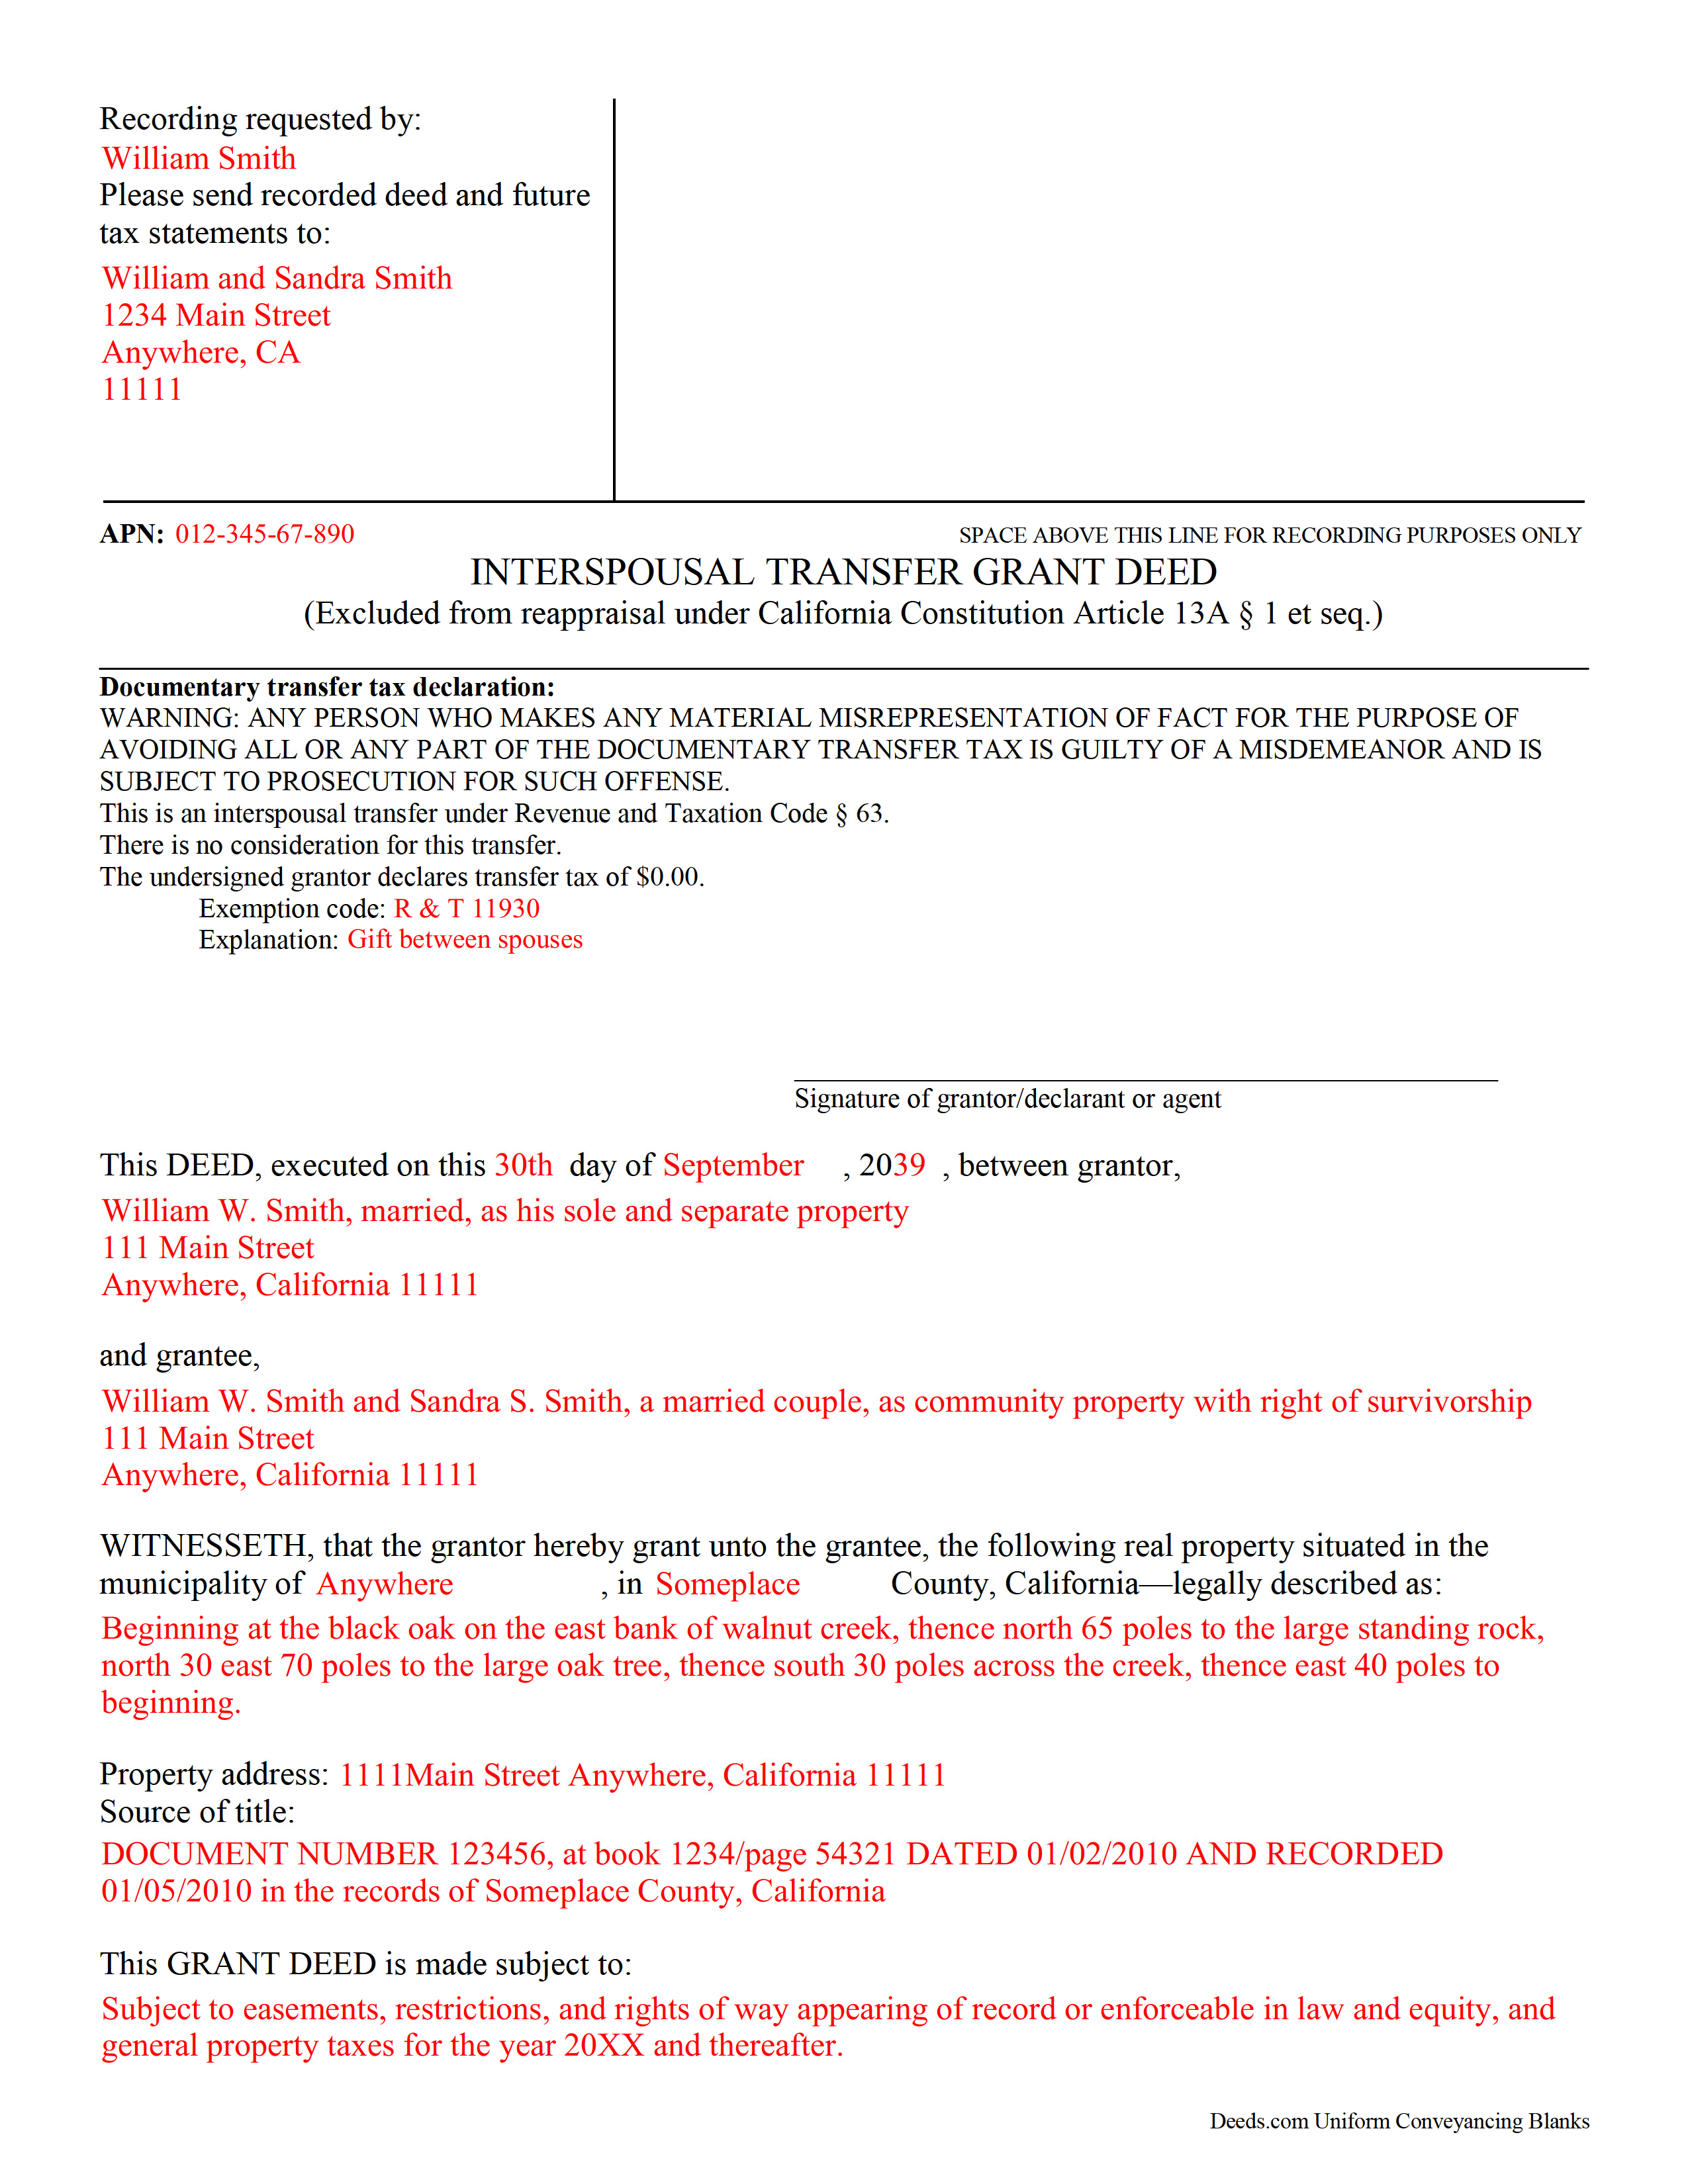 Completed Example of the Interspousal Transfer Grant Deed Document